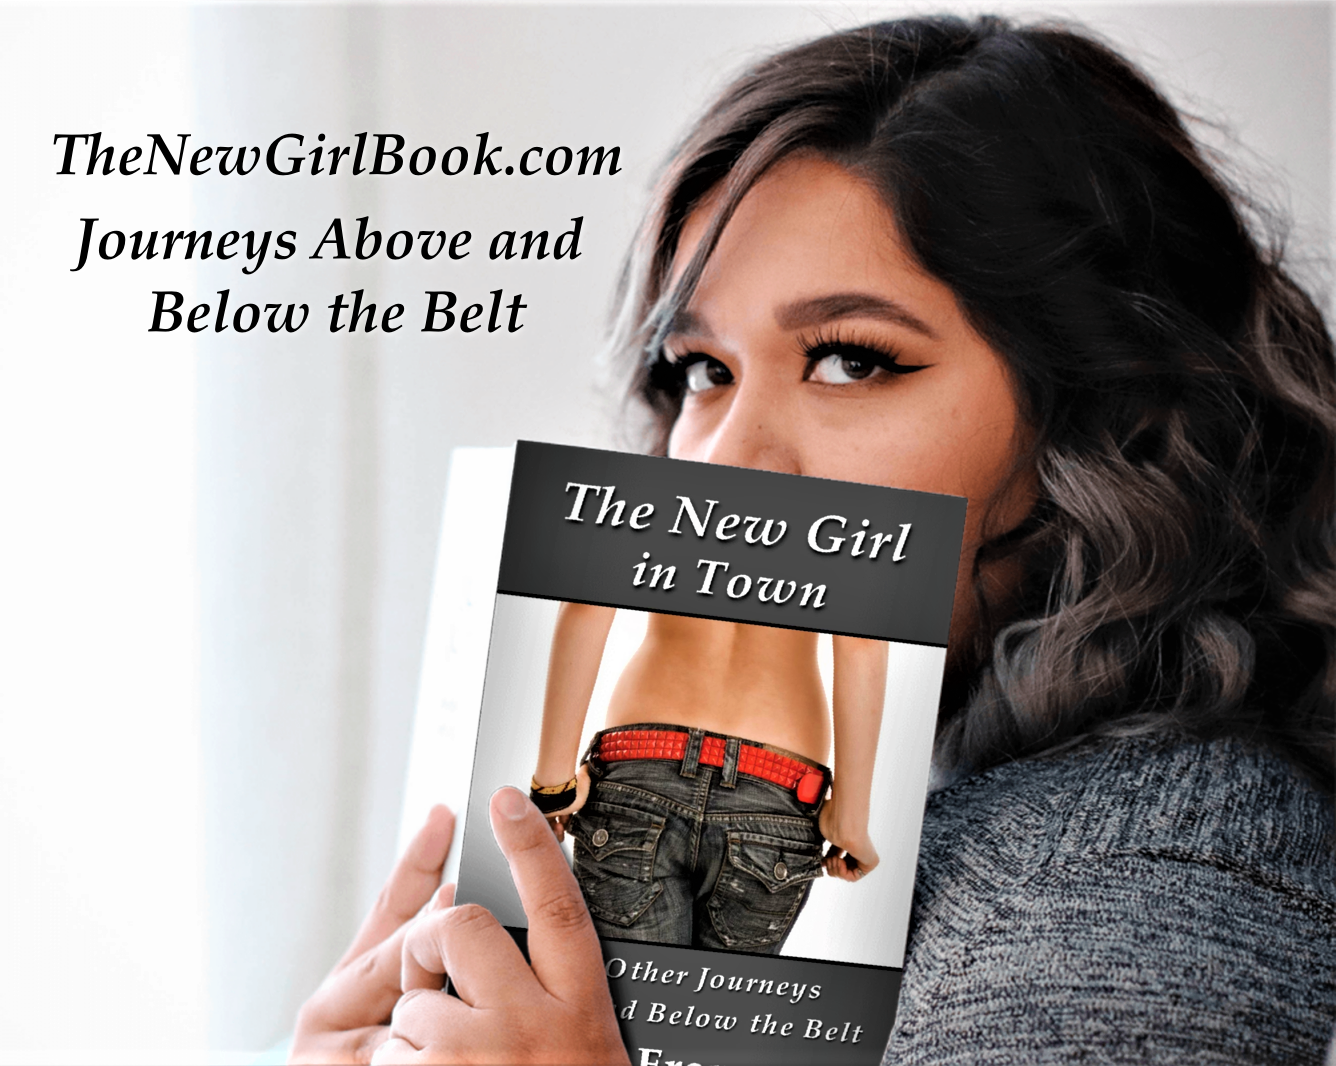 The New Girl in Town by Jaye Frances